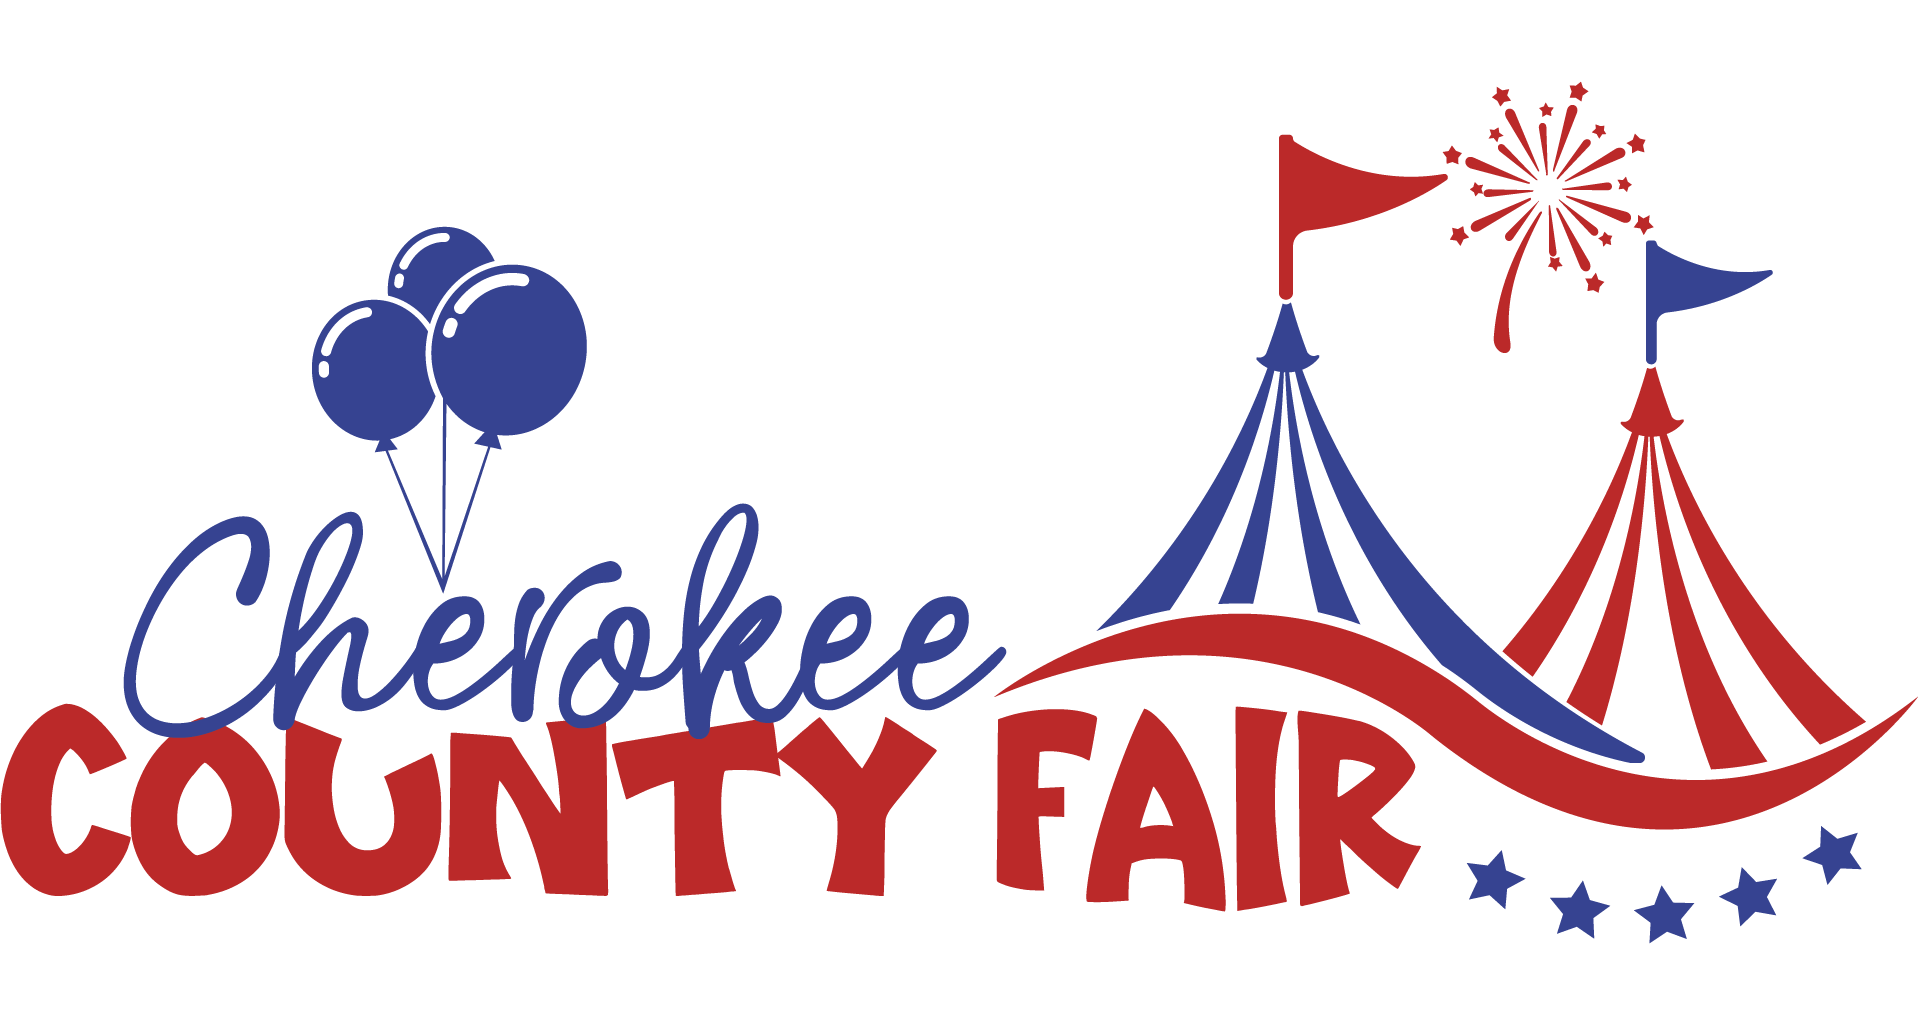 Cherokee County Fair - Hosted in Andrews, NC